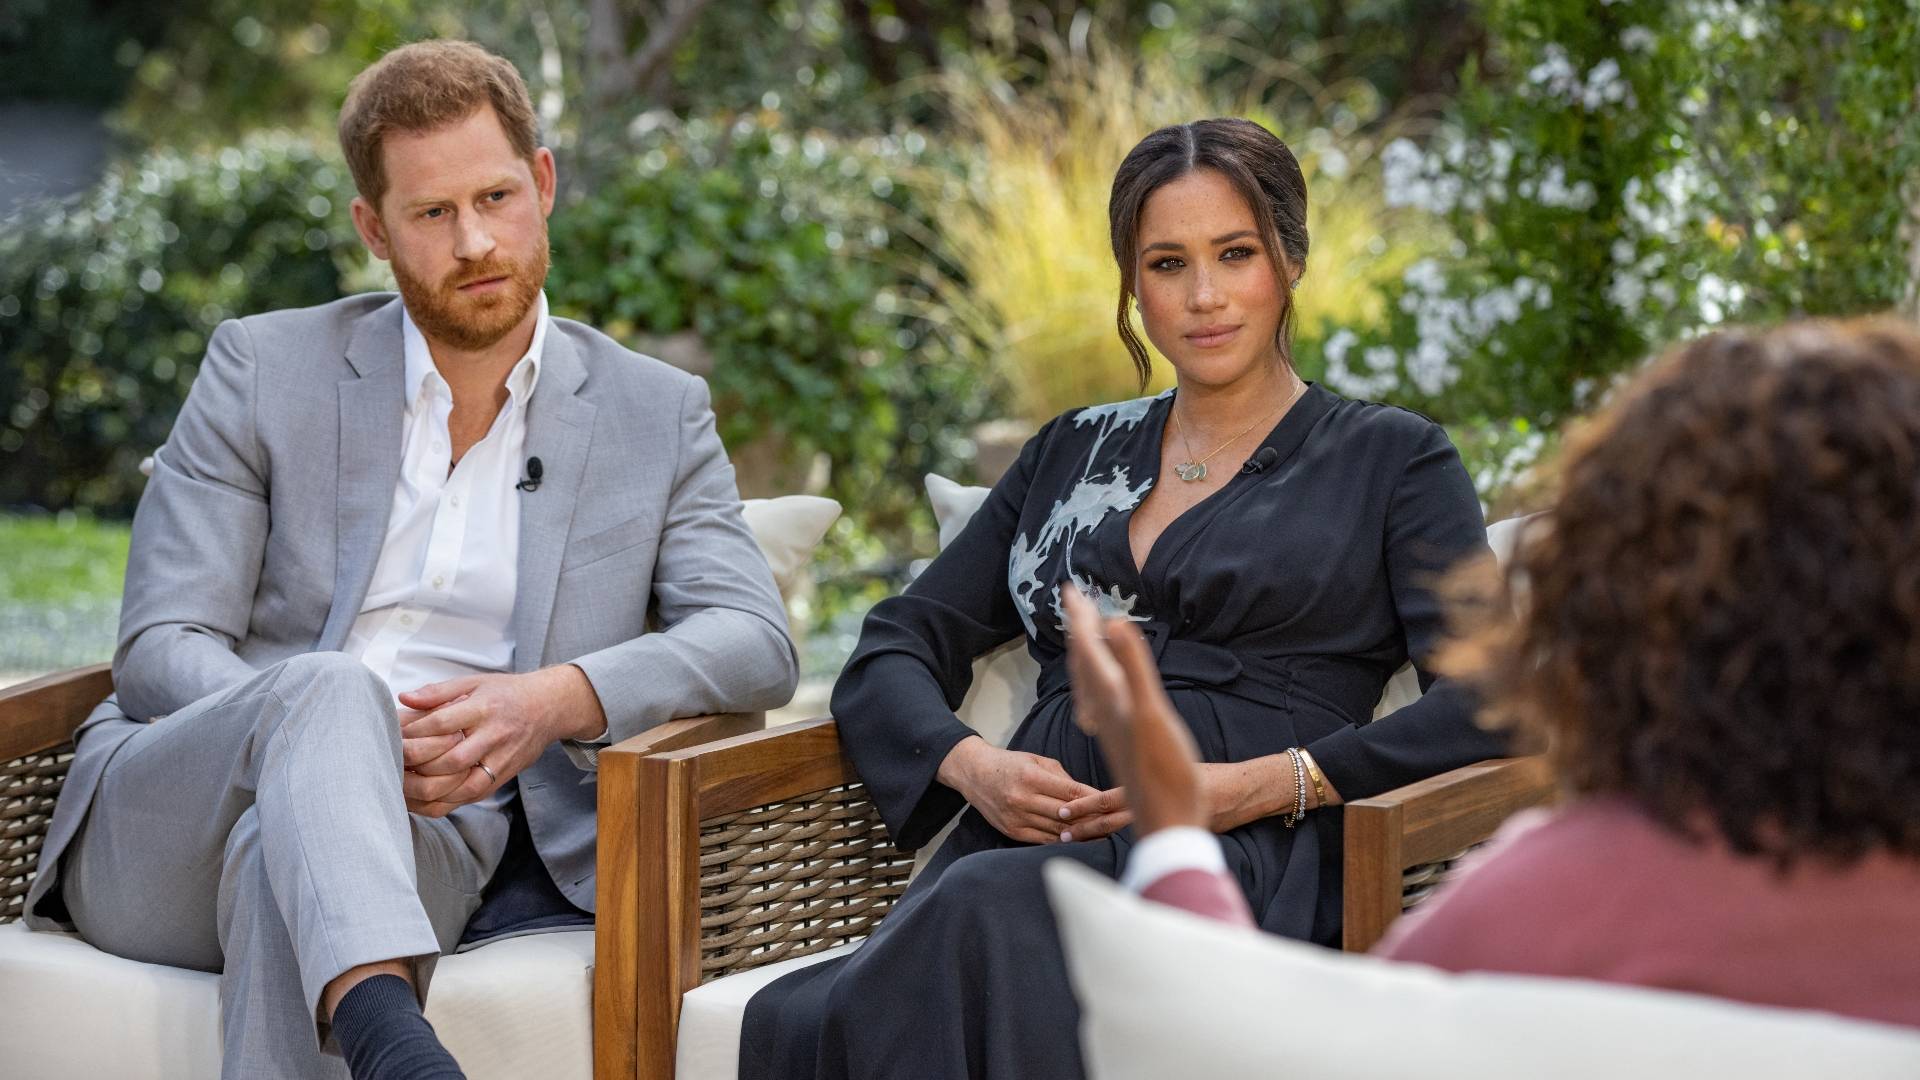 The much-awaited Oprah interview with Harry and Meghan, the Duke and Duchess of Sussex, caused a stir in British and American press. /Joe Pugliese/Harpo Productions/AFP